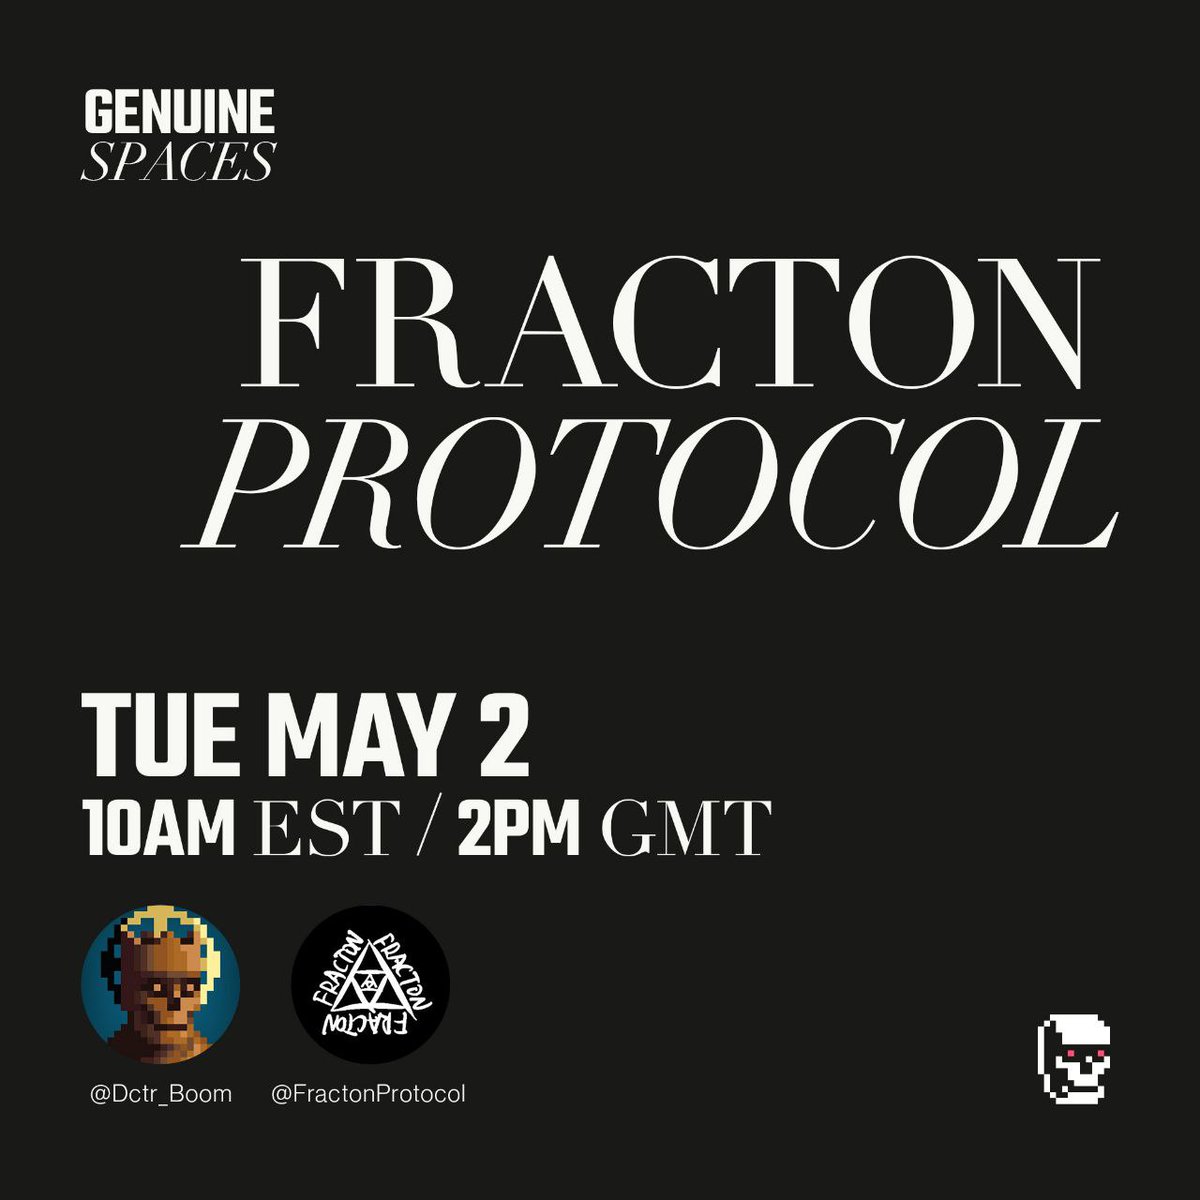 🎁GIVEAWAY🎁 We've teamed up with #FractonProtocol for upcoming spaces! Let’s spread the Love! 👉🏼 Tell us 1 good thing about FractonProtocol! 👉🏼 Like and RT 👉🏼 Follow @FractonProtocol @GenuineUndead 🎁 $500 raffle 5 WINNERS only Ends 4 May (UTC). #FractonProtocol #UndeadNeverDie